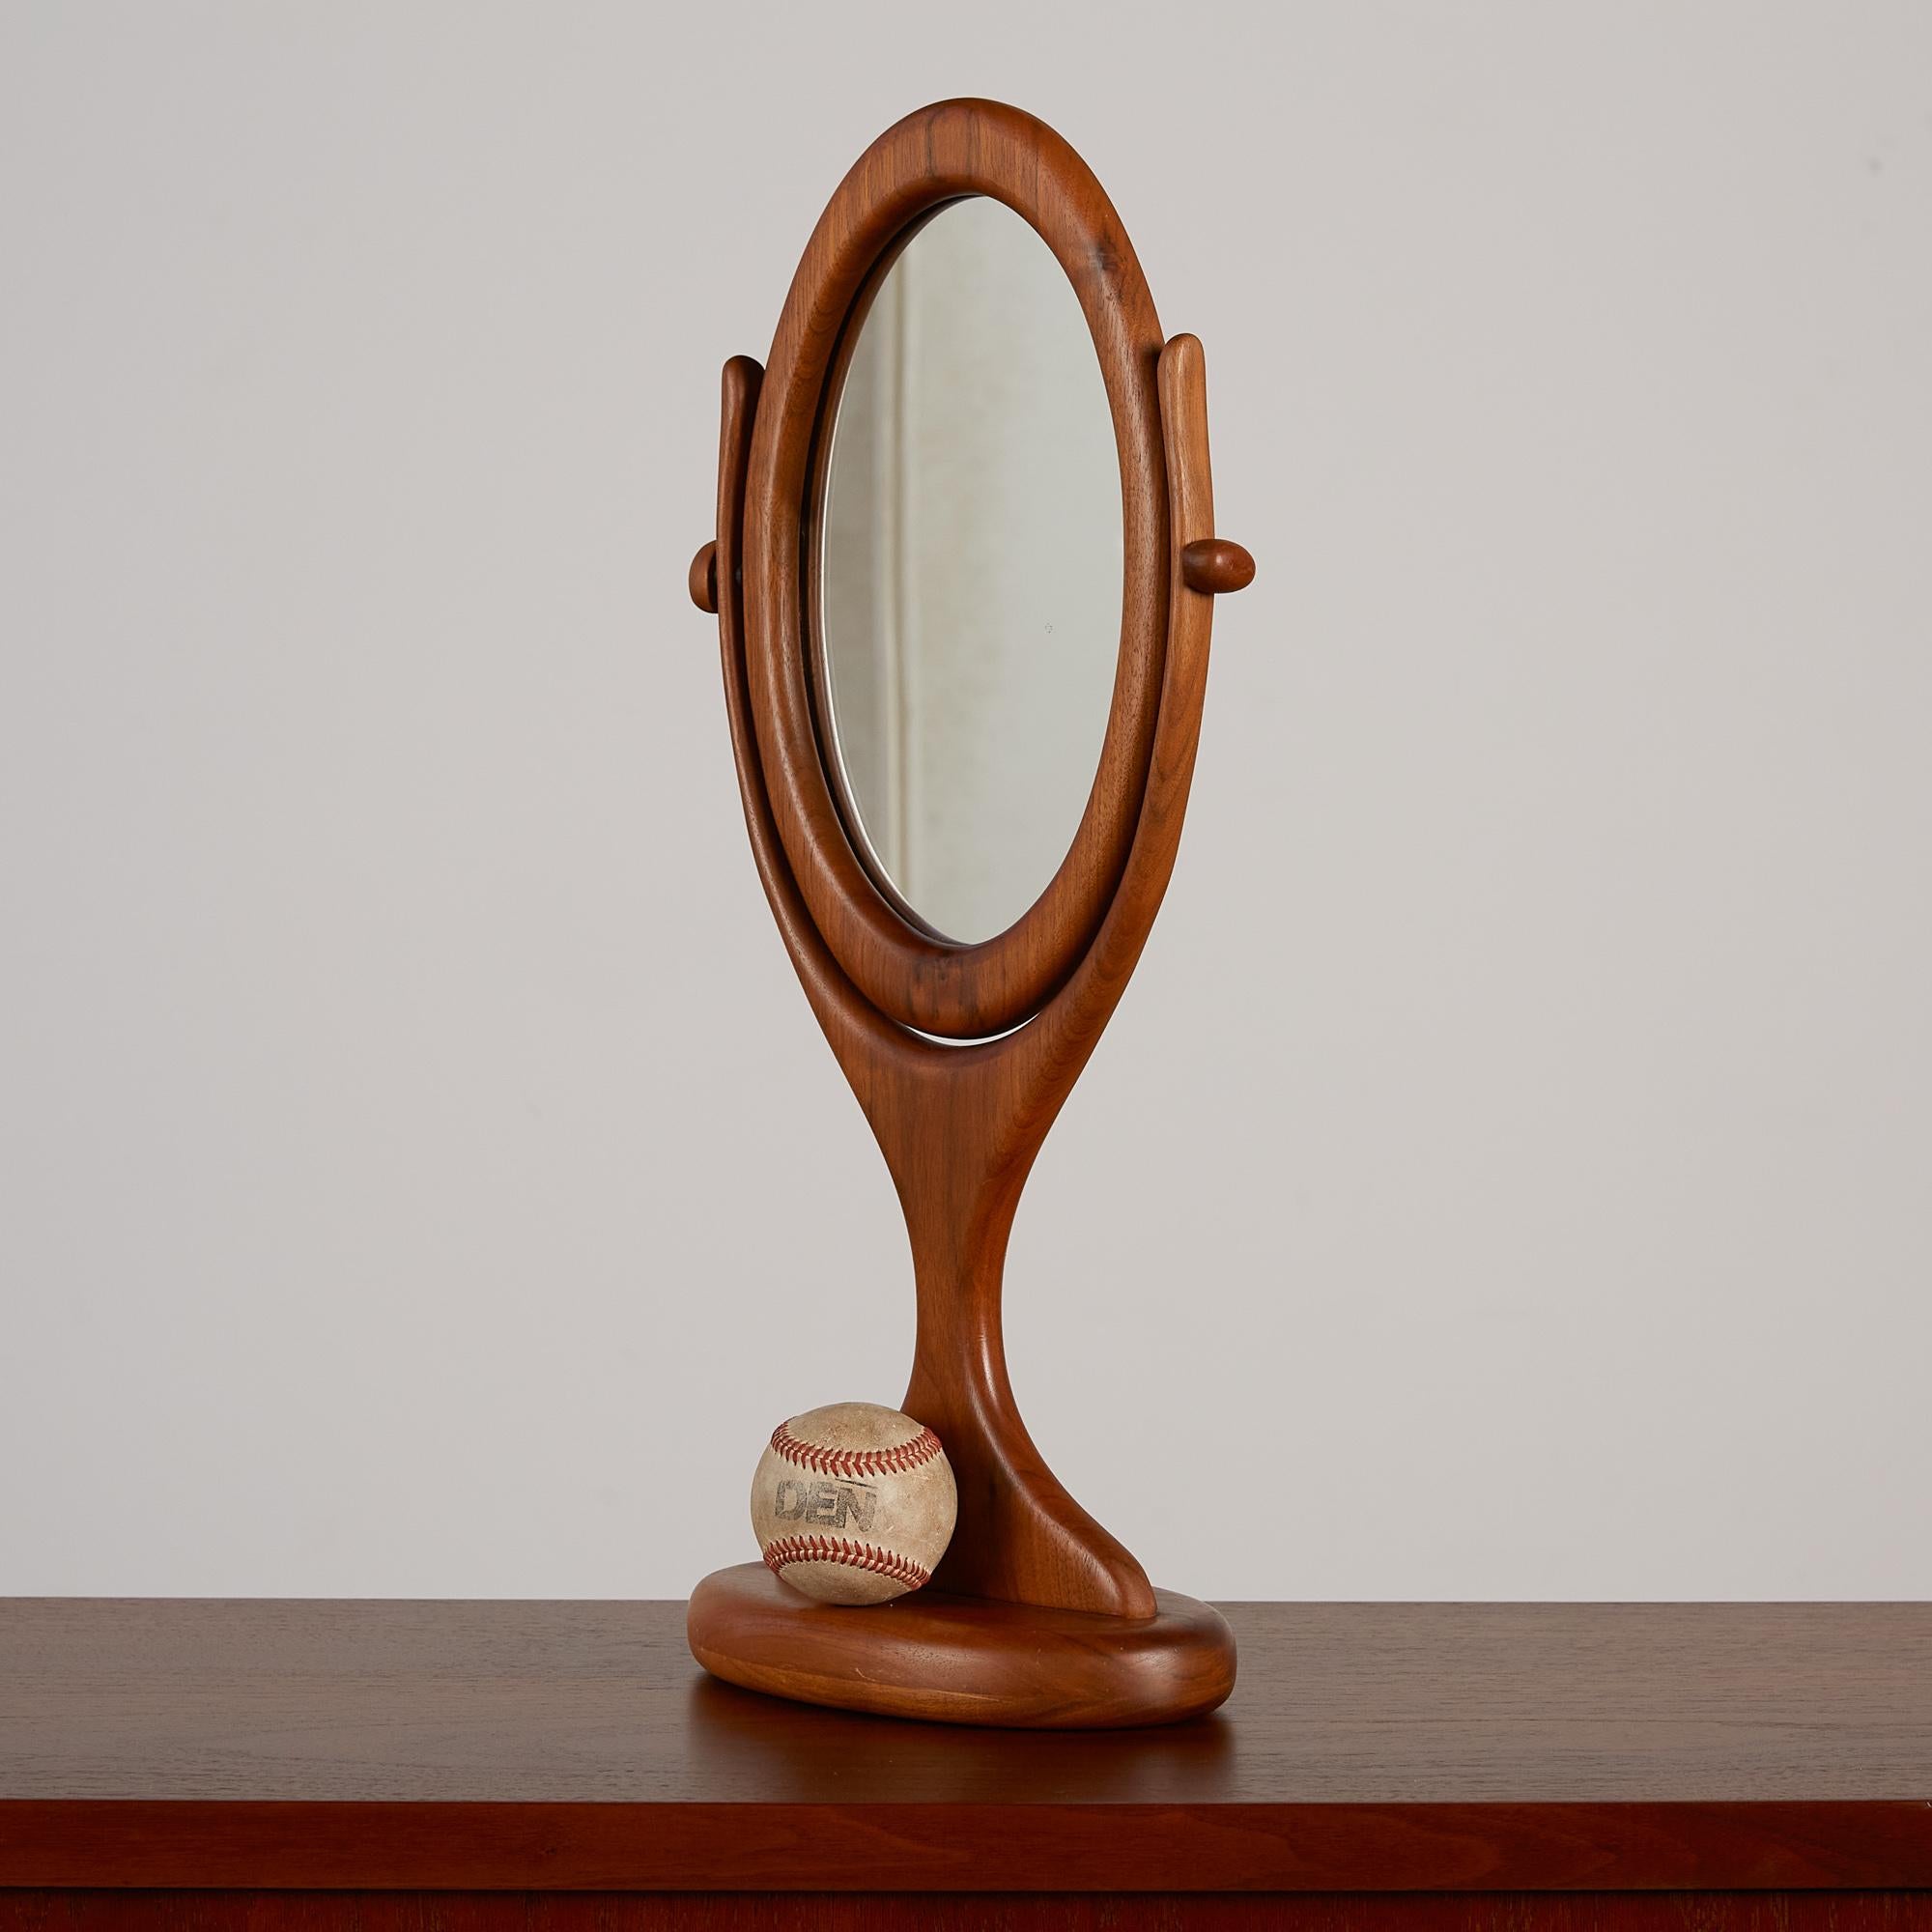 This hand carved vanity mirror features a thick sculpted walnut frame with an oval shaped piece of inset glass. The mirror is set in a swivel frame to adjust your angle. This playful design would be perfect for a vanity, or on a shelf or tablespace